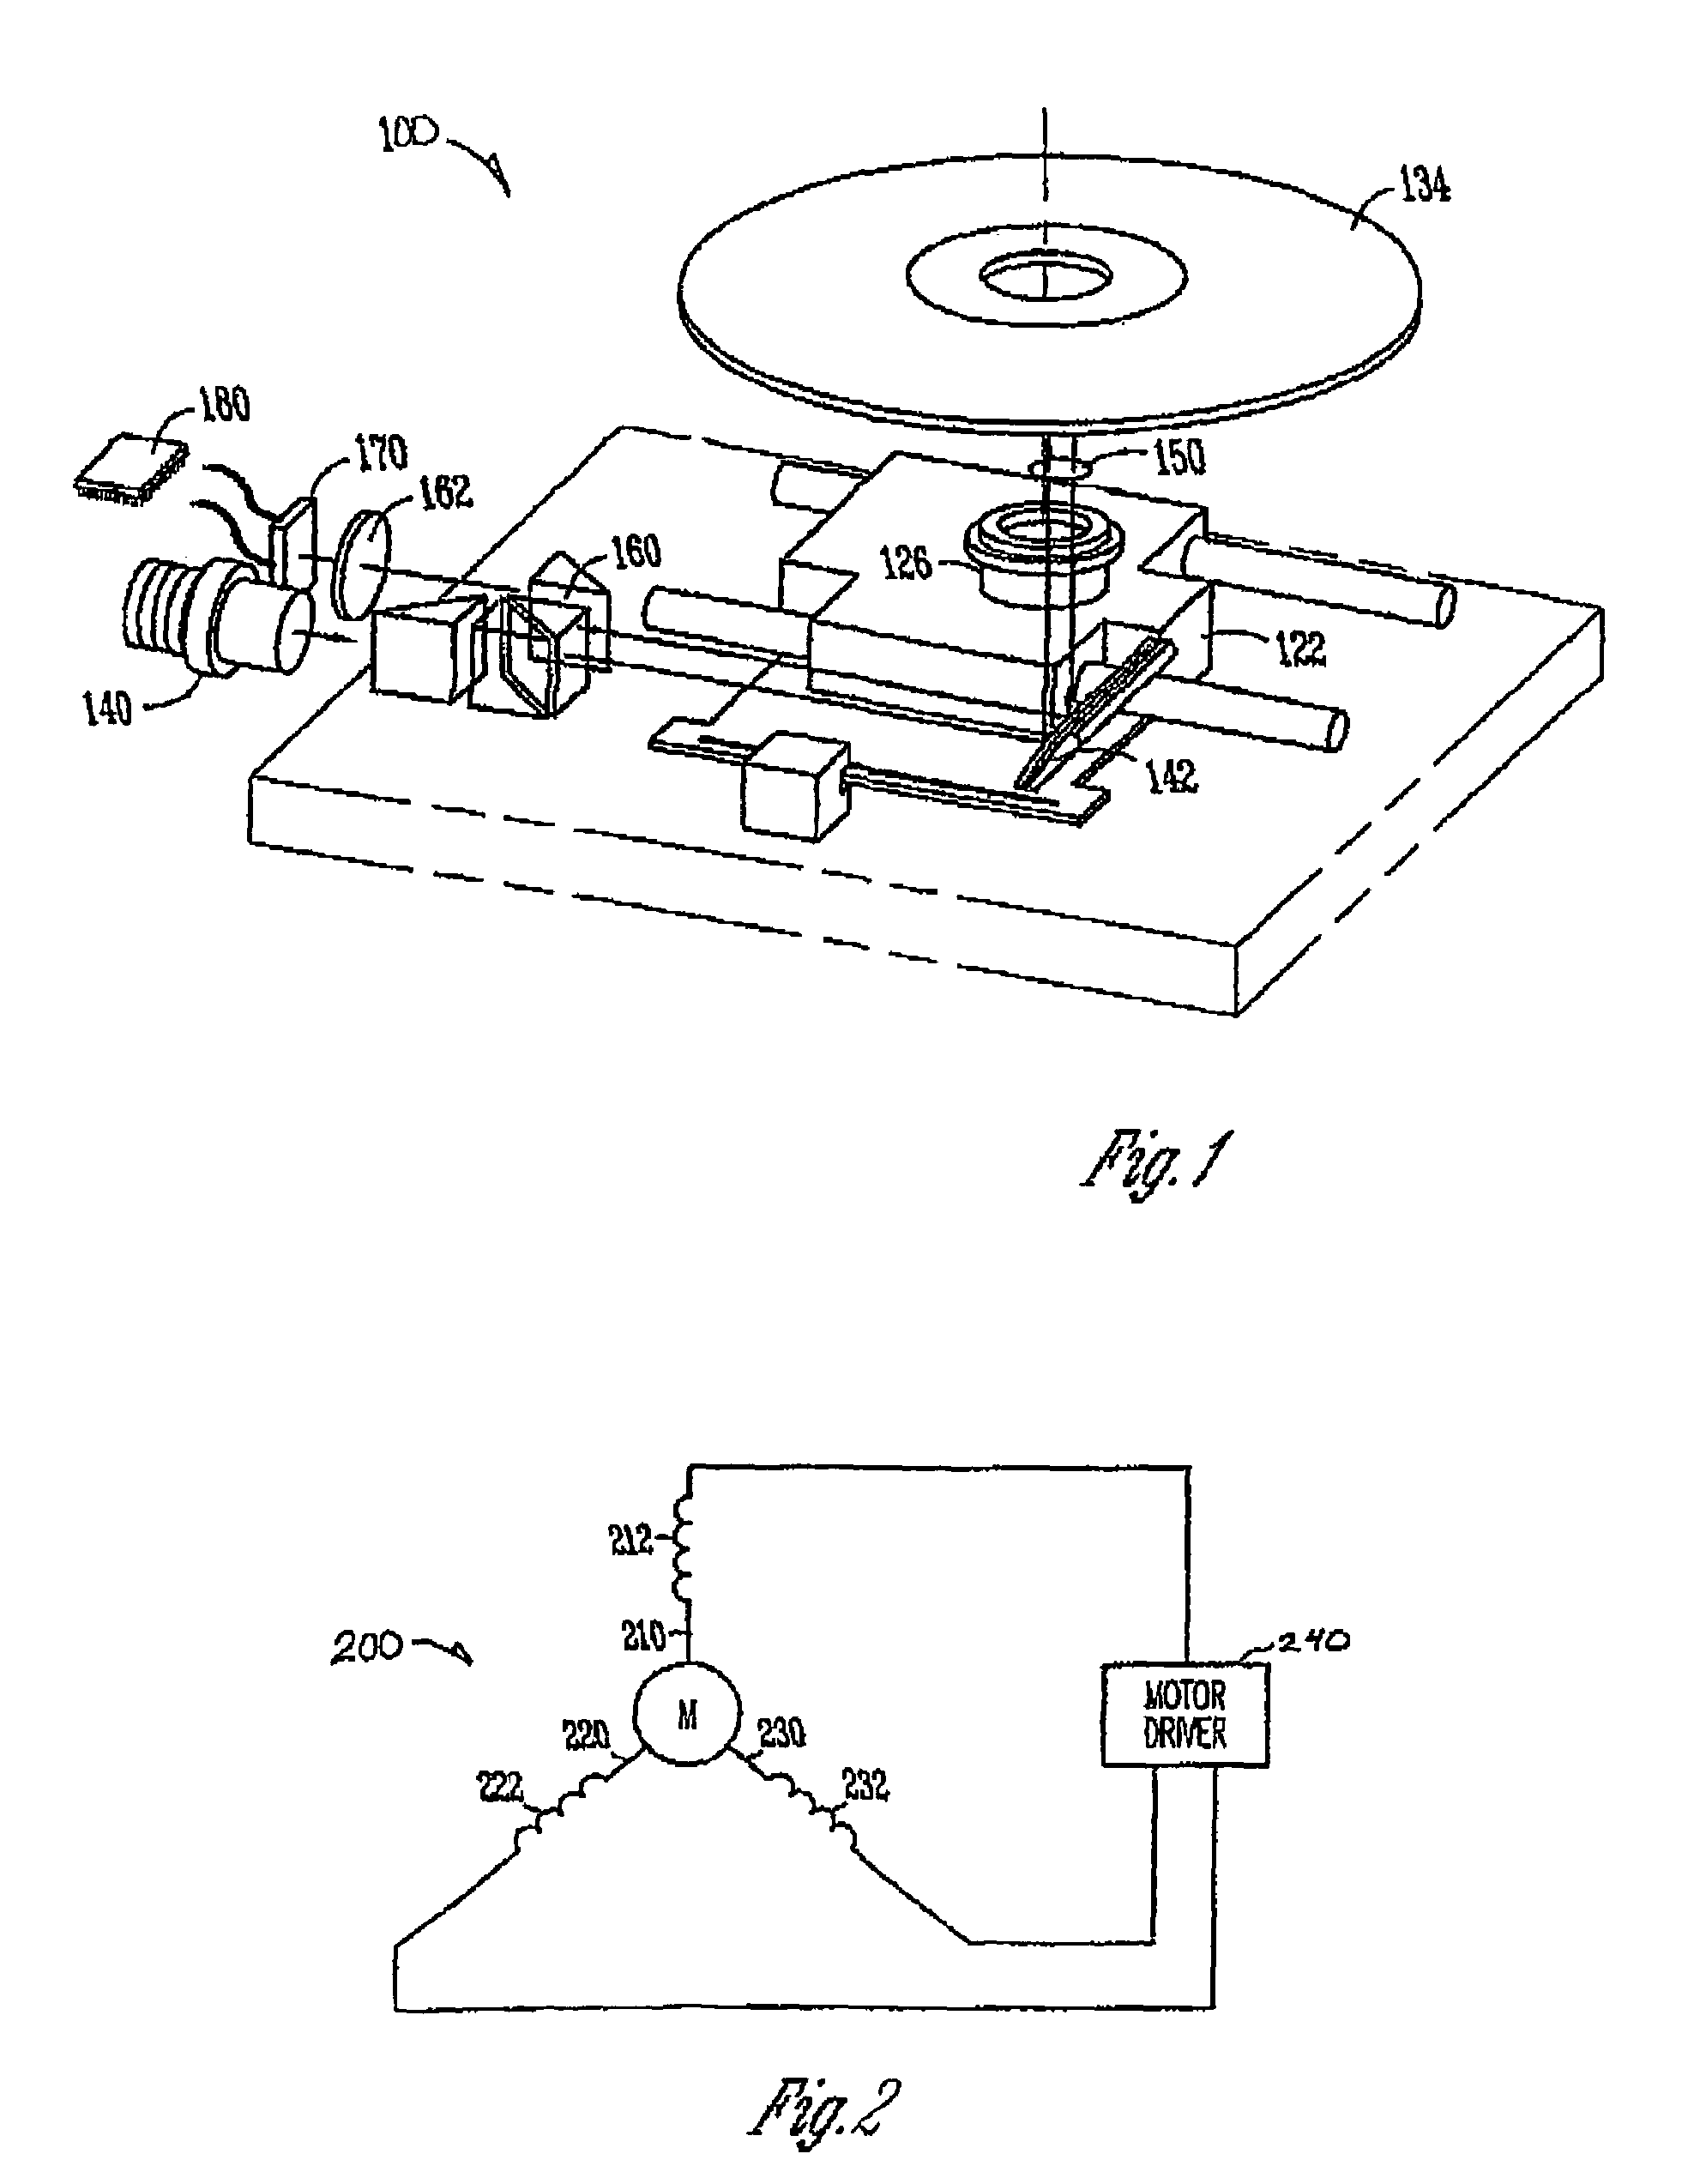 Method of CD/DVD vibration detection by monitoring motor conditions